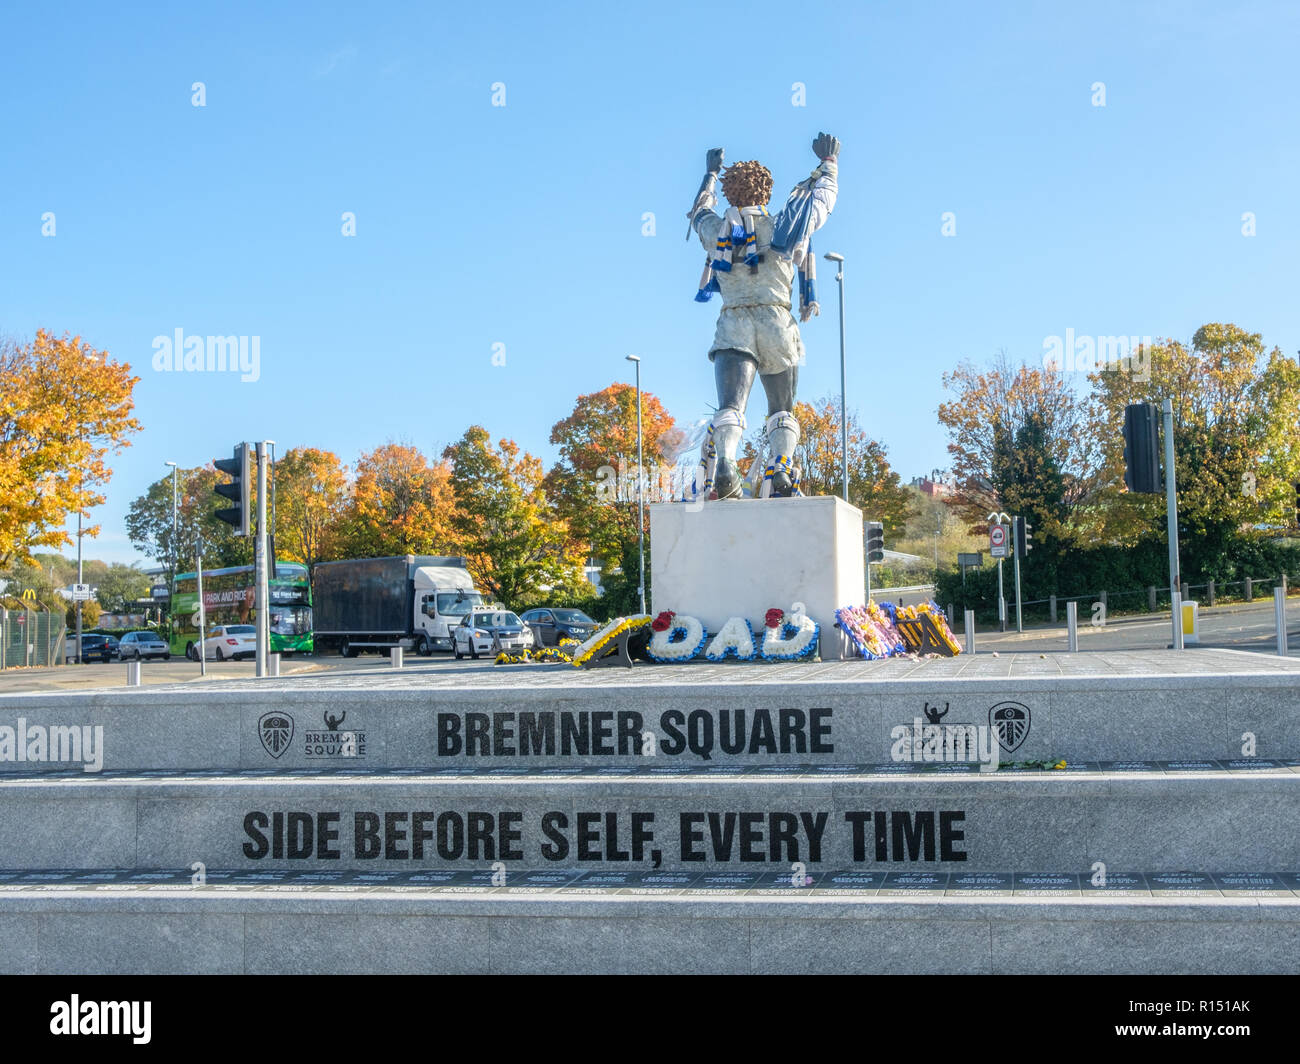 : Bremner square outside Elland Road stadium. Billy Bremner was legendary football player and captain of Leeds United and Scotland. Stock Photo